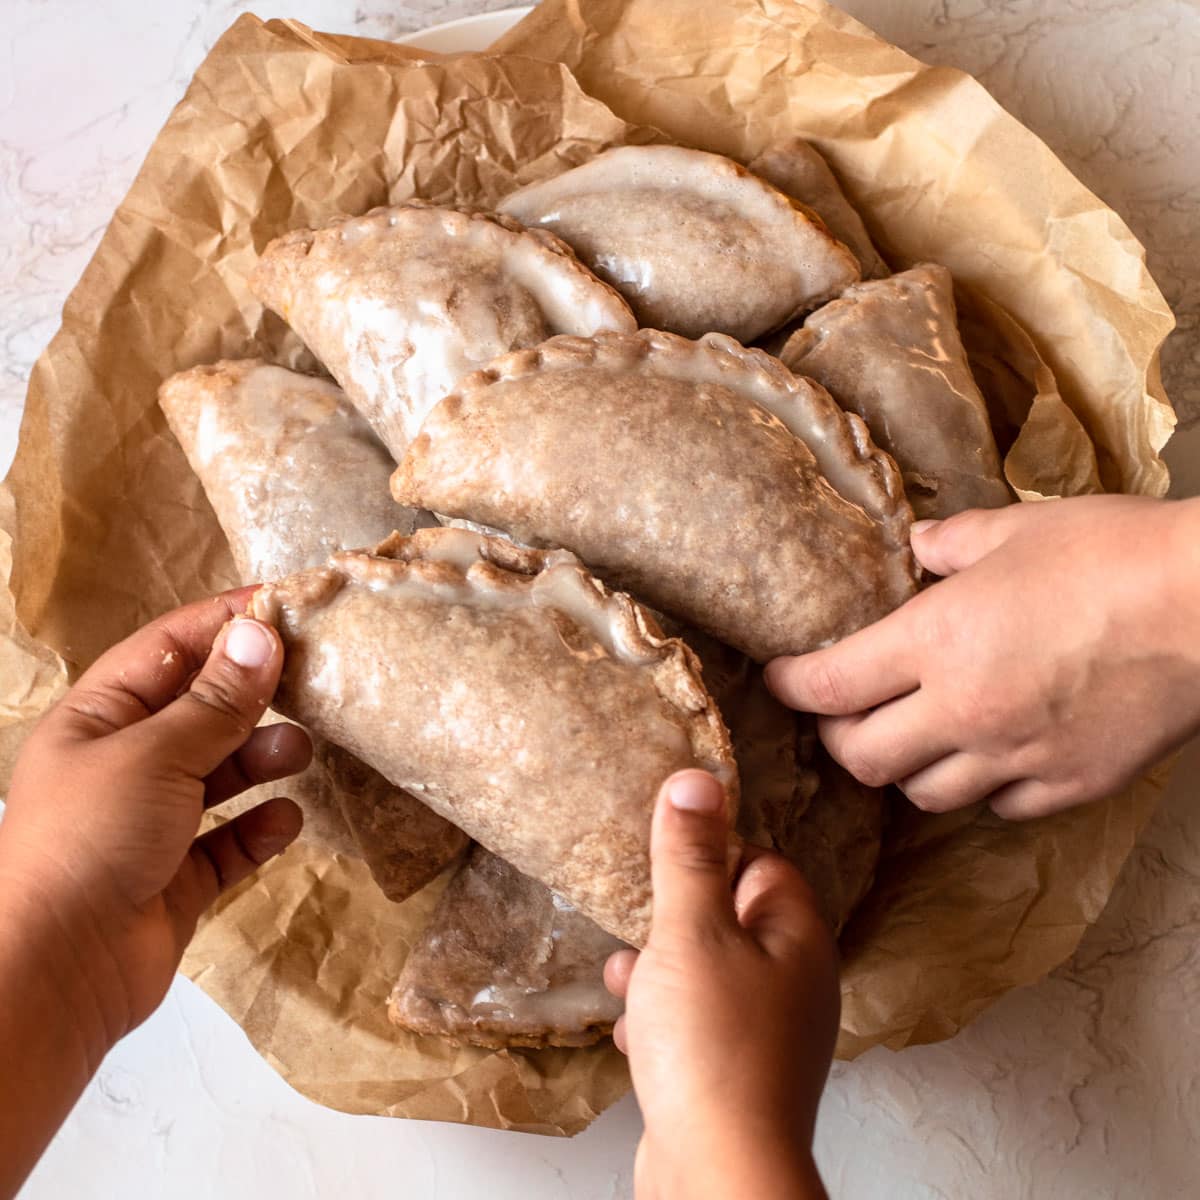 Kids hands picking up pumpkin pasties inspired by harry potter.